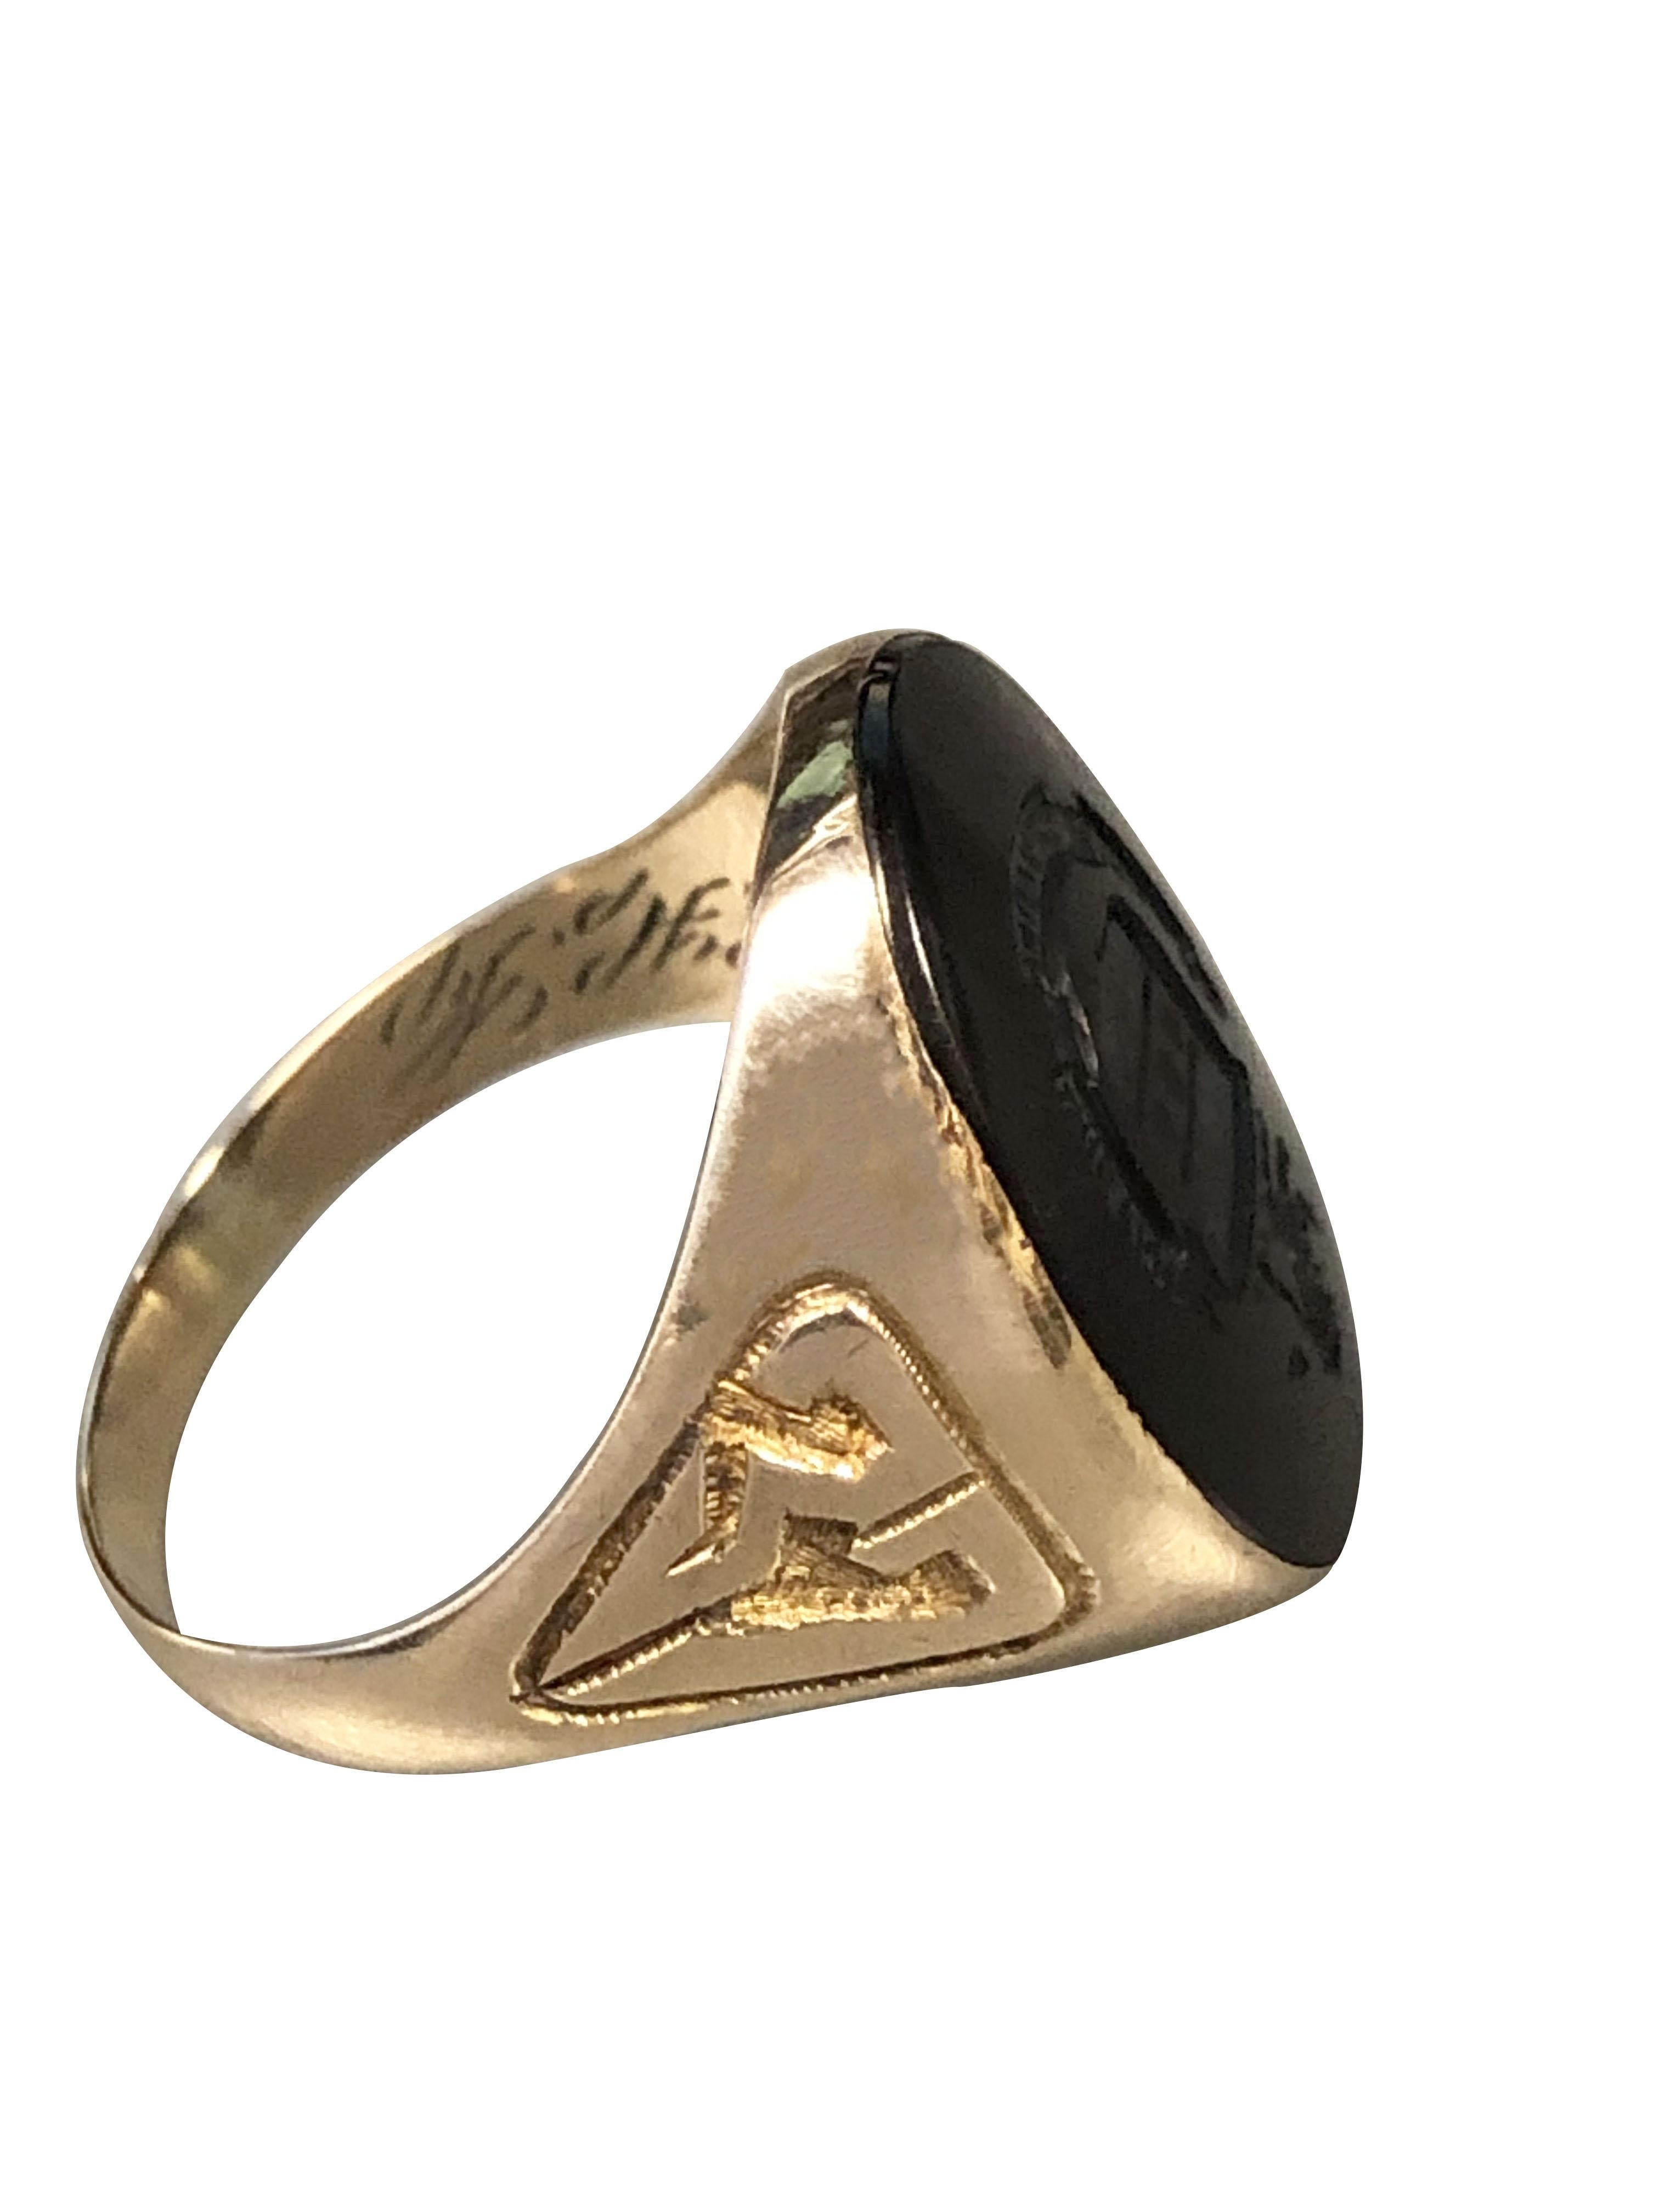 Circa 1930s Penn Club of Philadelphia 10k Yellow Gold and Onyx Signet Ring, the top measures 3/4 X 5/8 inch, a deep carved intaglio of the Penn Club and the wording, 